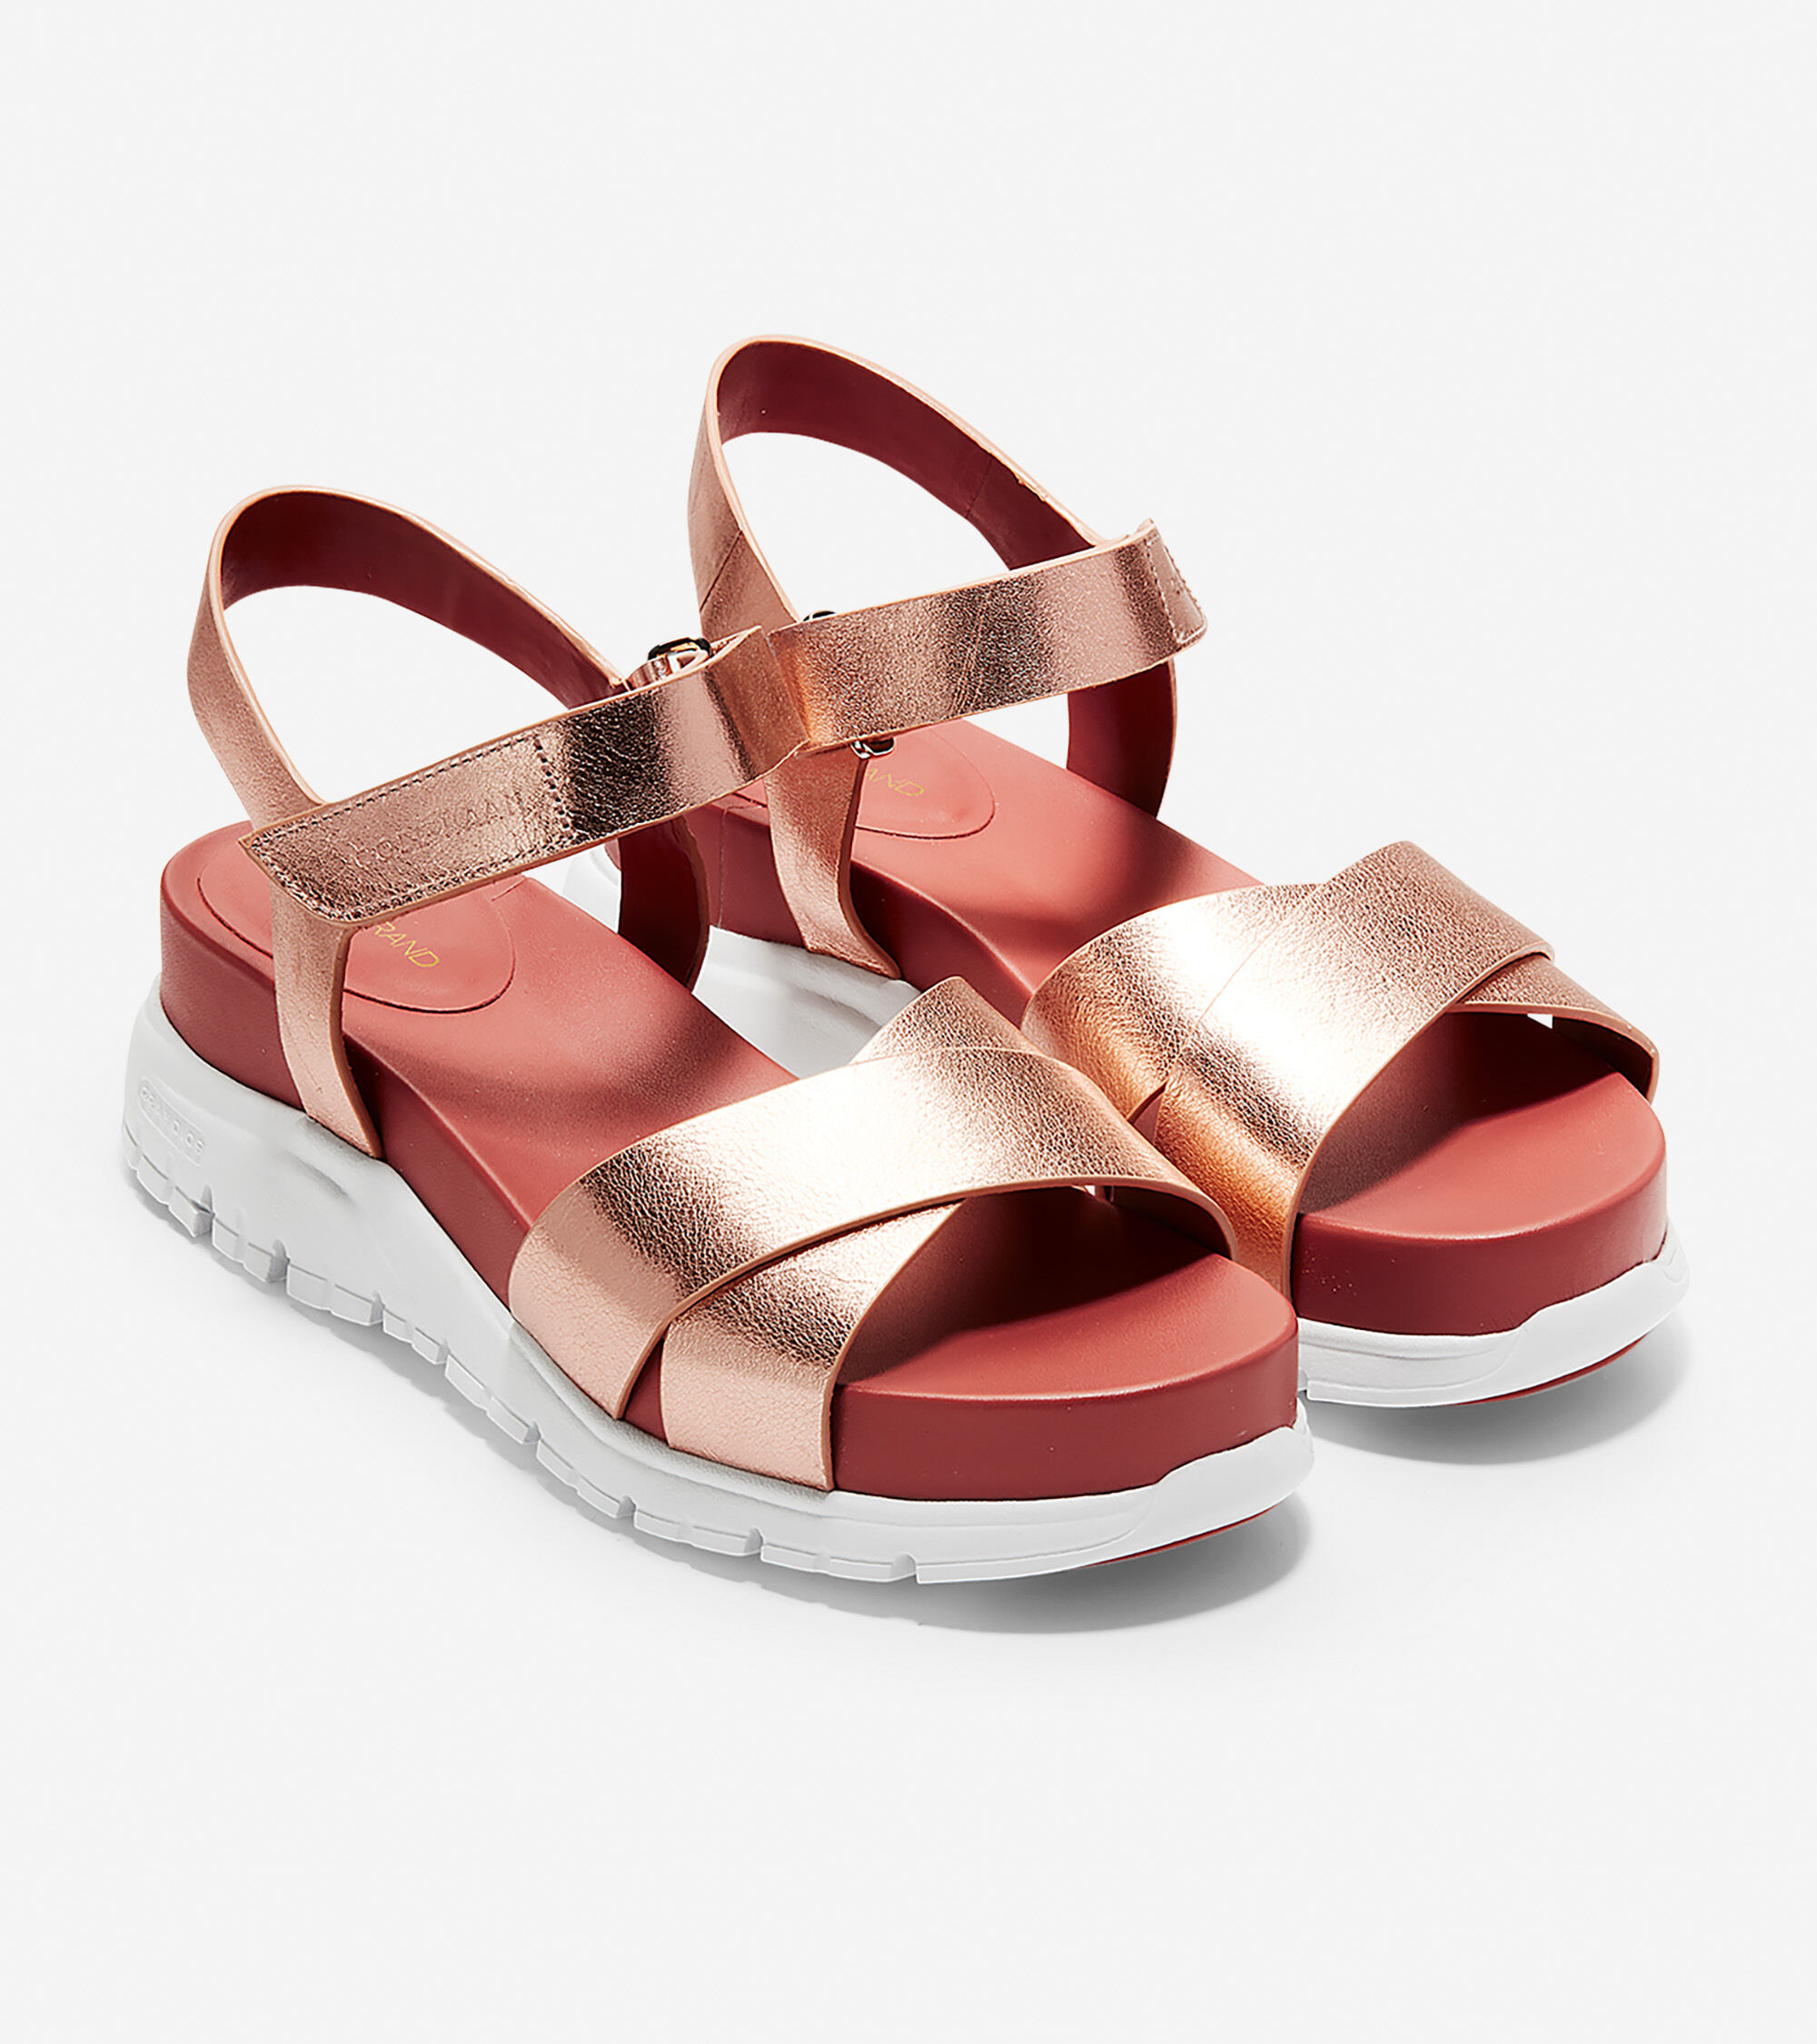 Criss Cross Sandal in Rose Gold Leather 